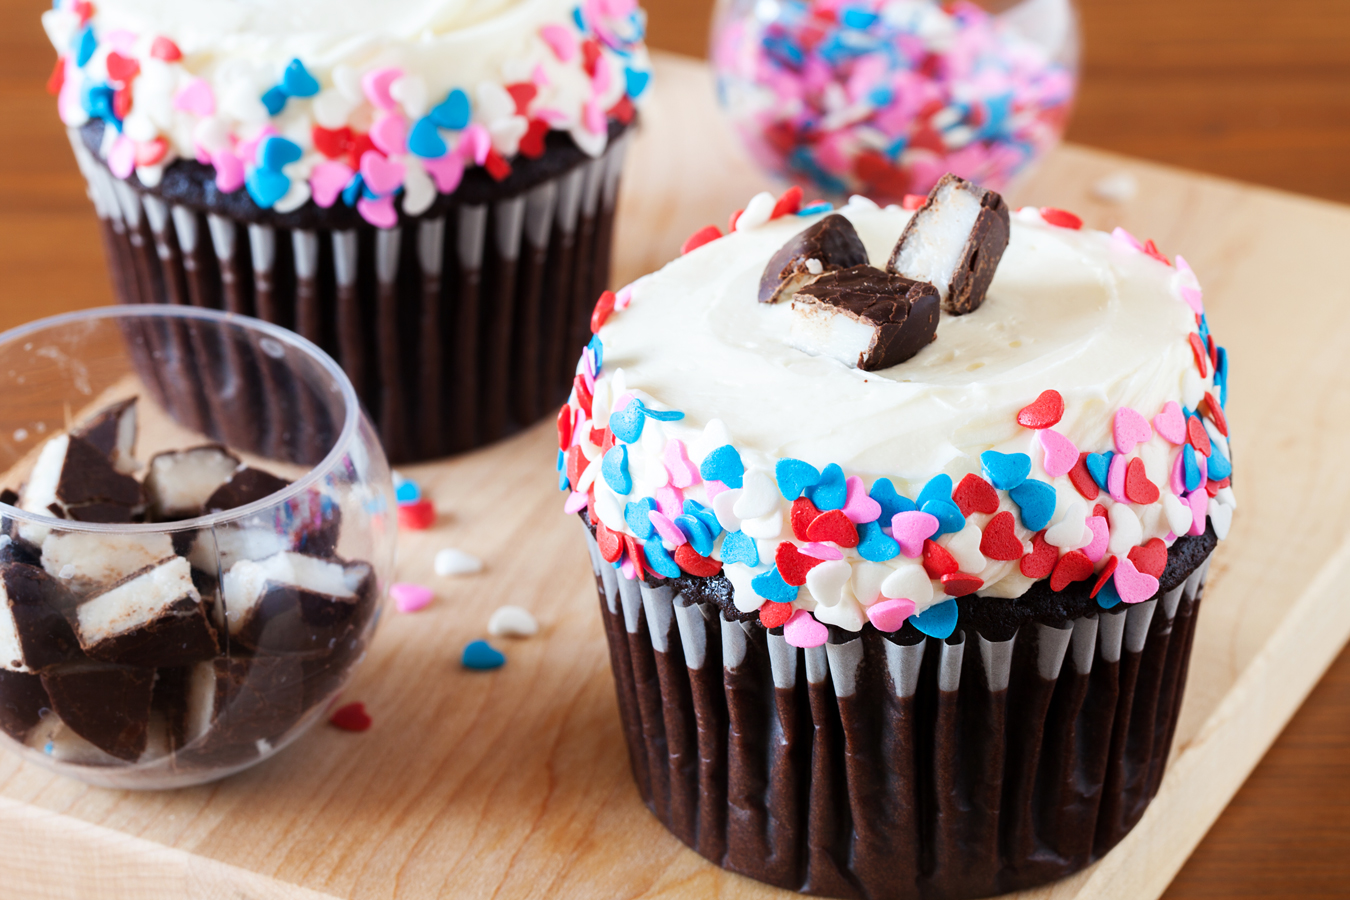 Horizontal image of two chocolate cupcakes with peppermint frosting and heart sprinkles.